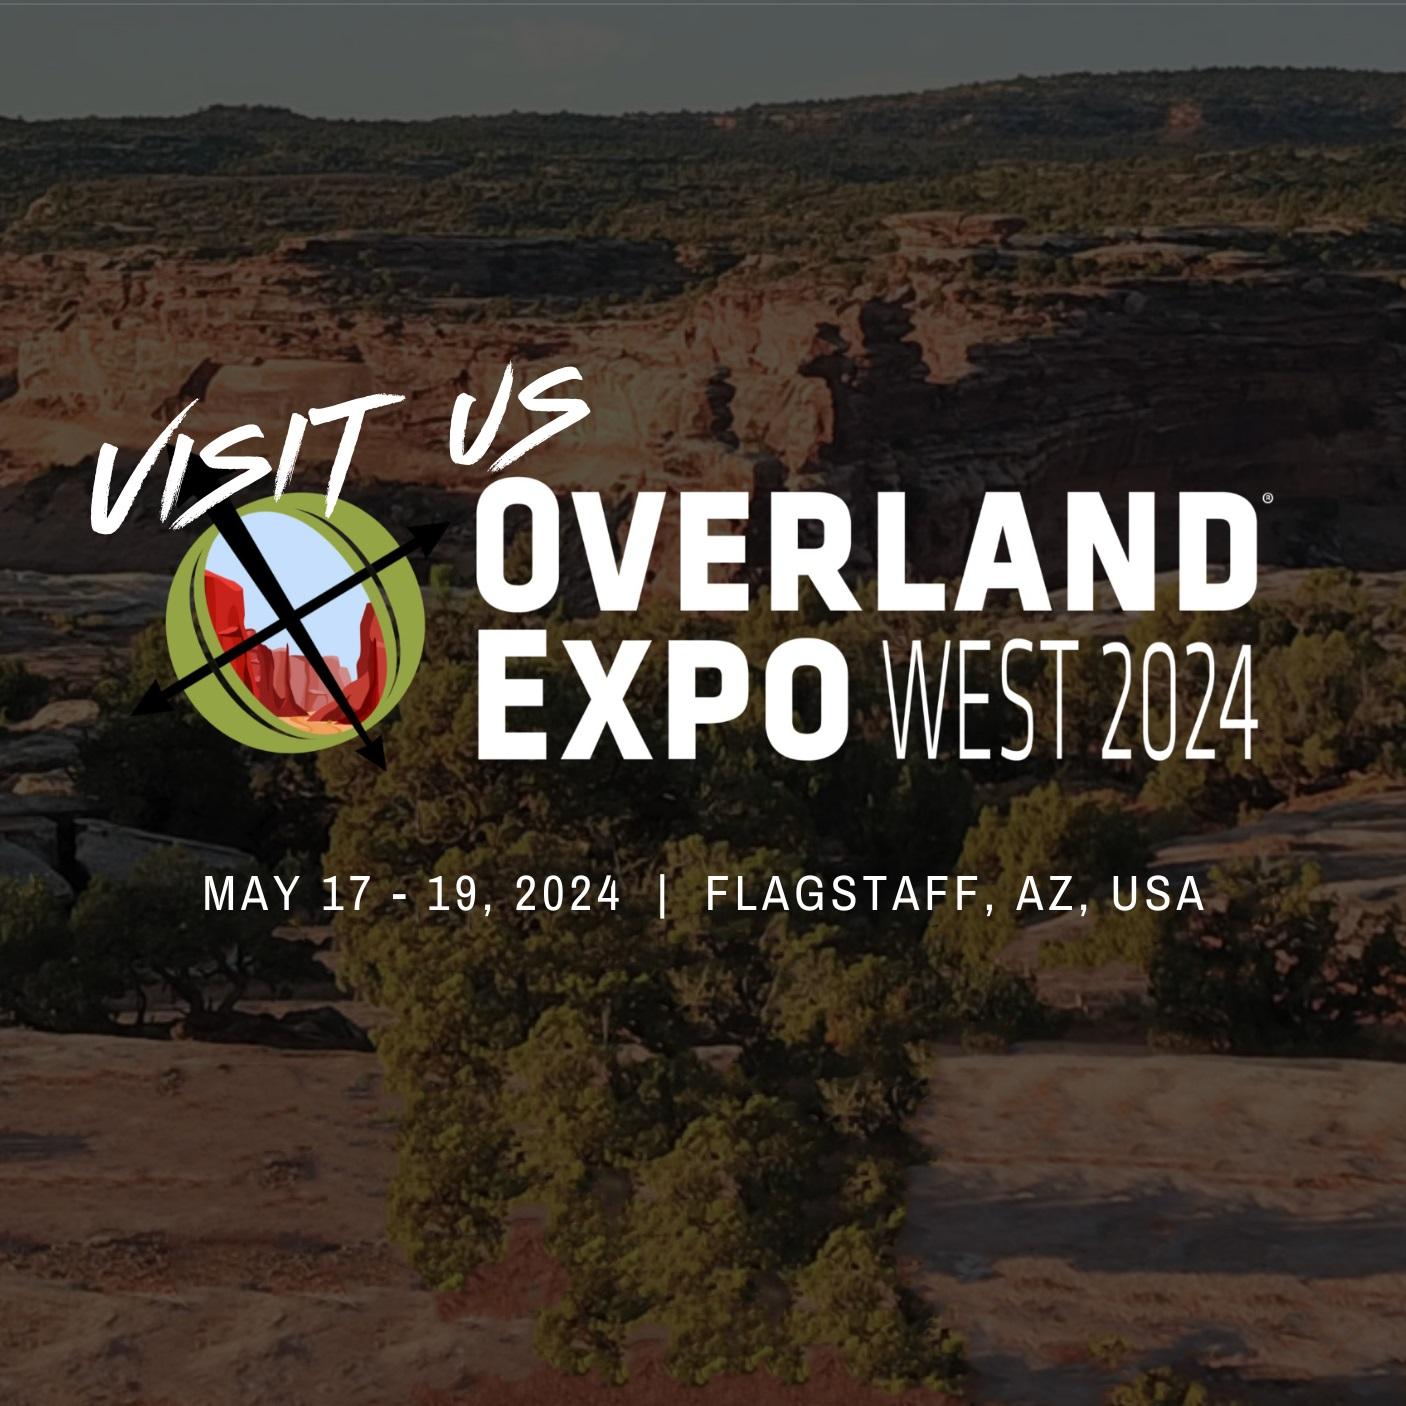 Join Us at Overland Expo West in Flagstaff, Arizona